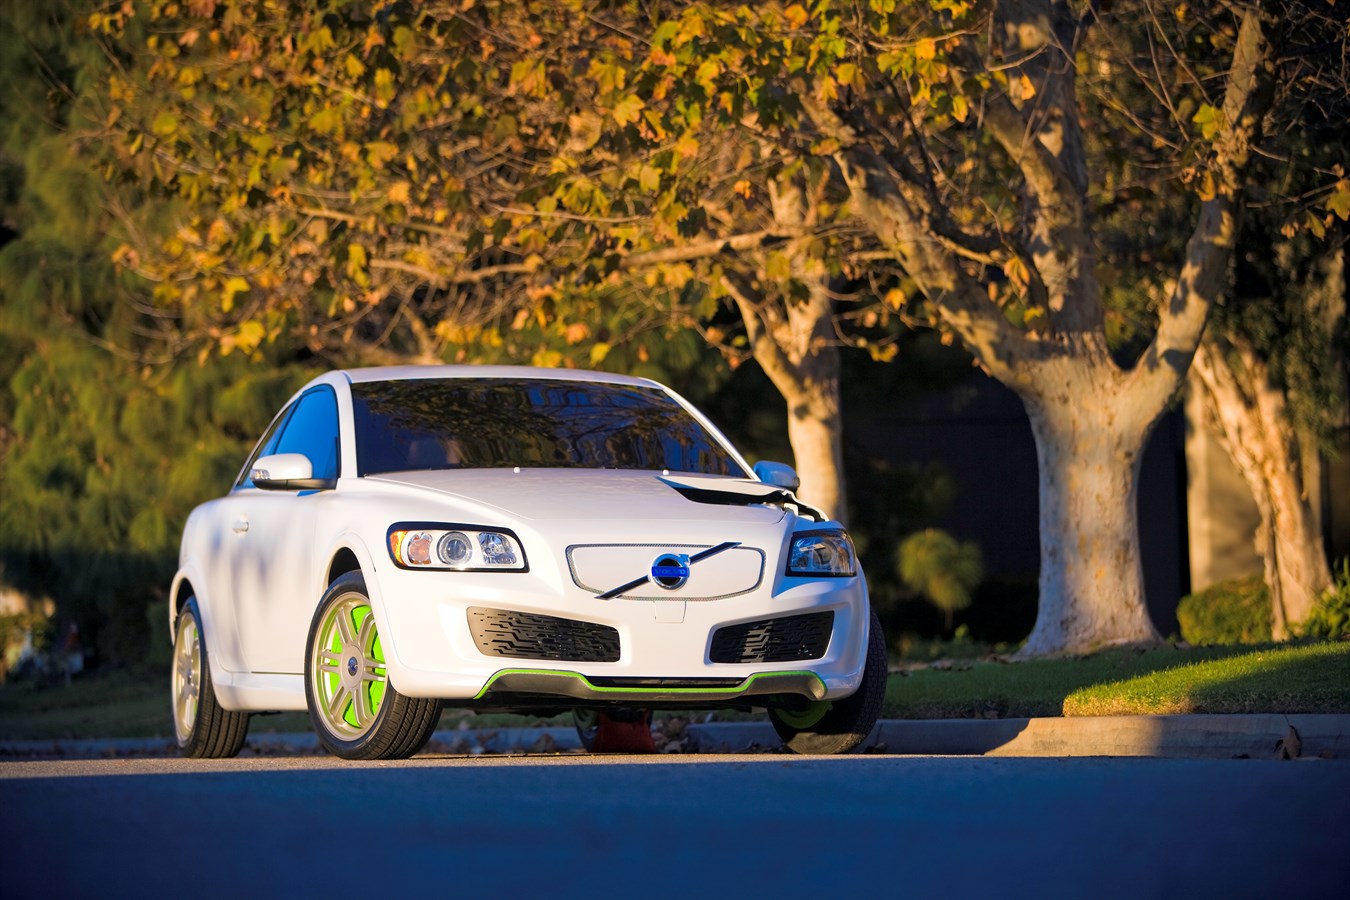 Volvo ReCharge Concept, a plug-in hybrid